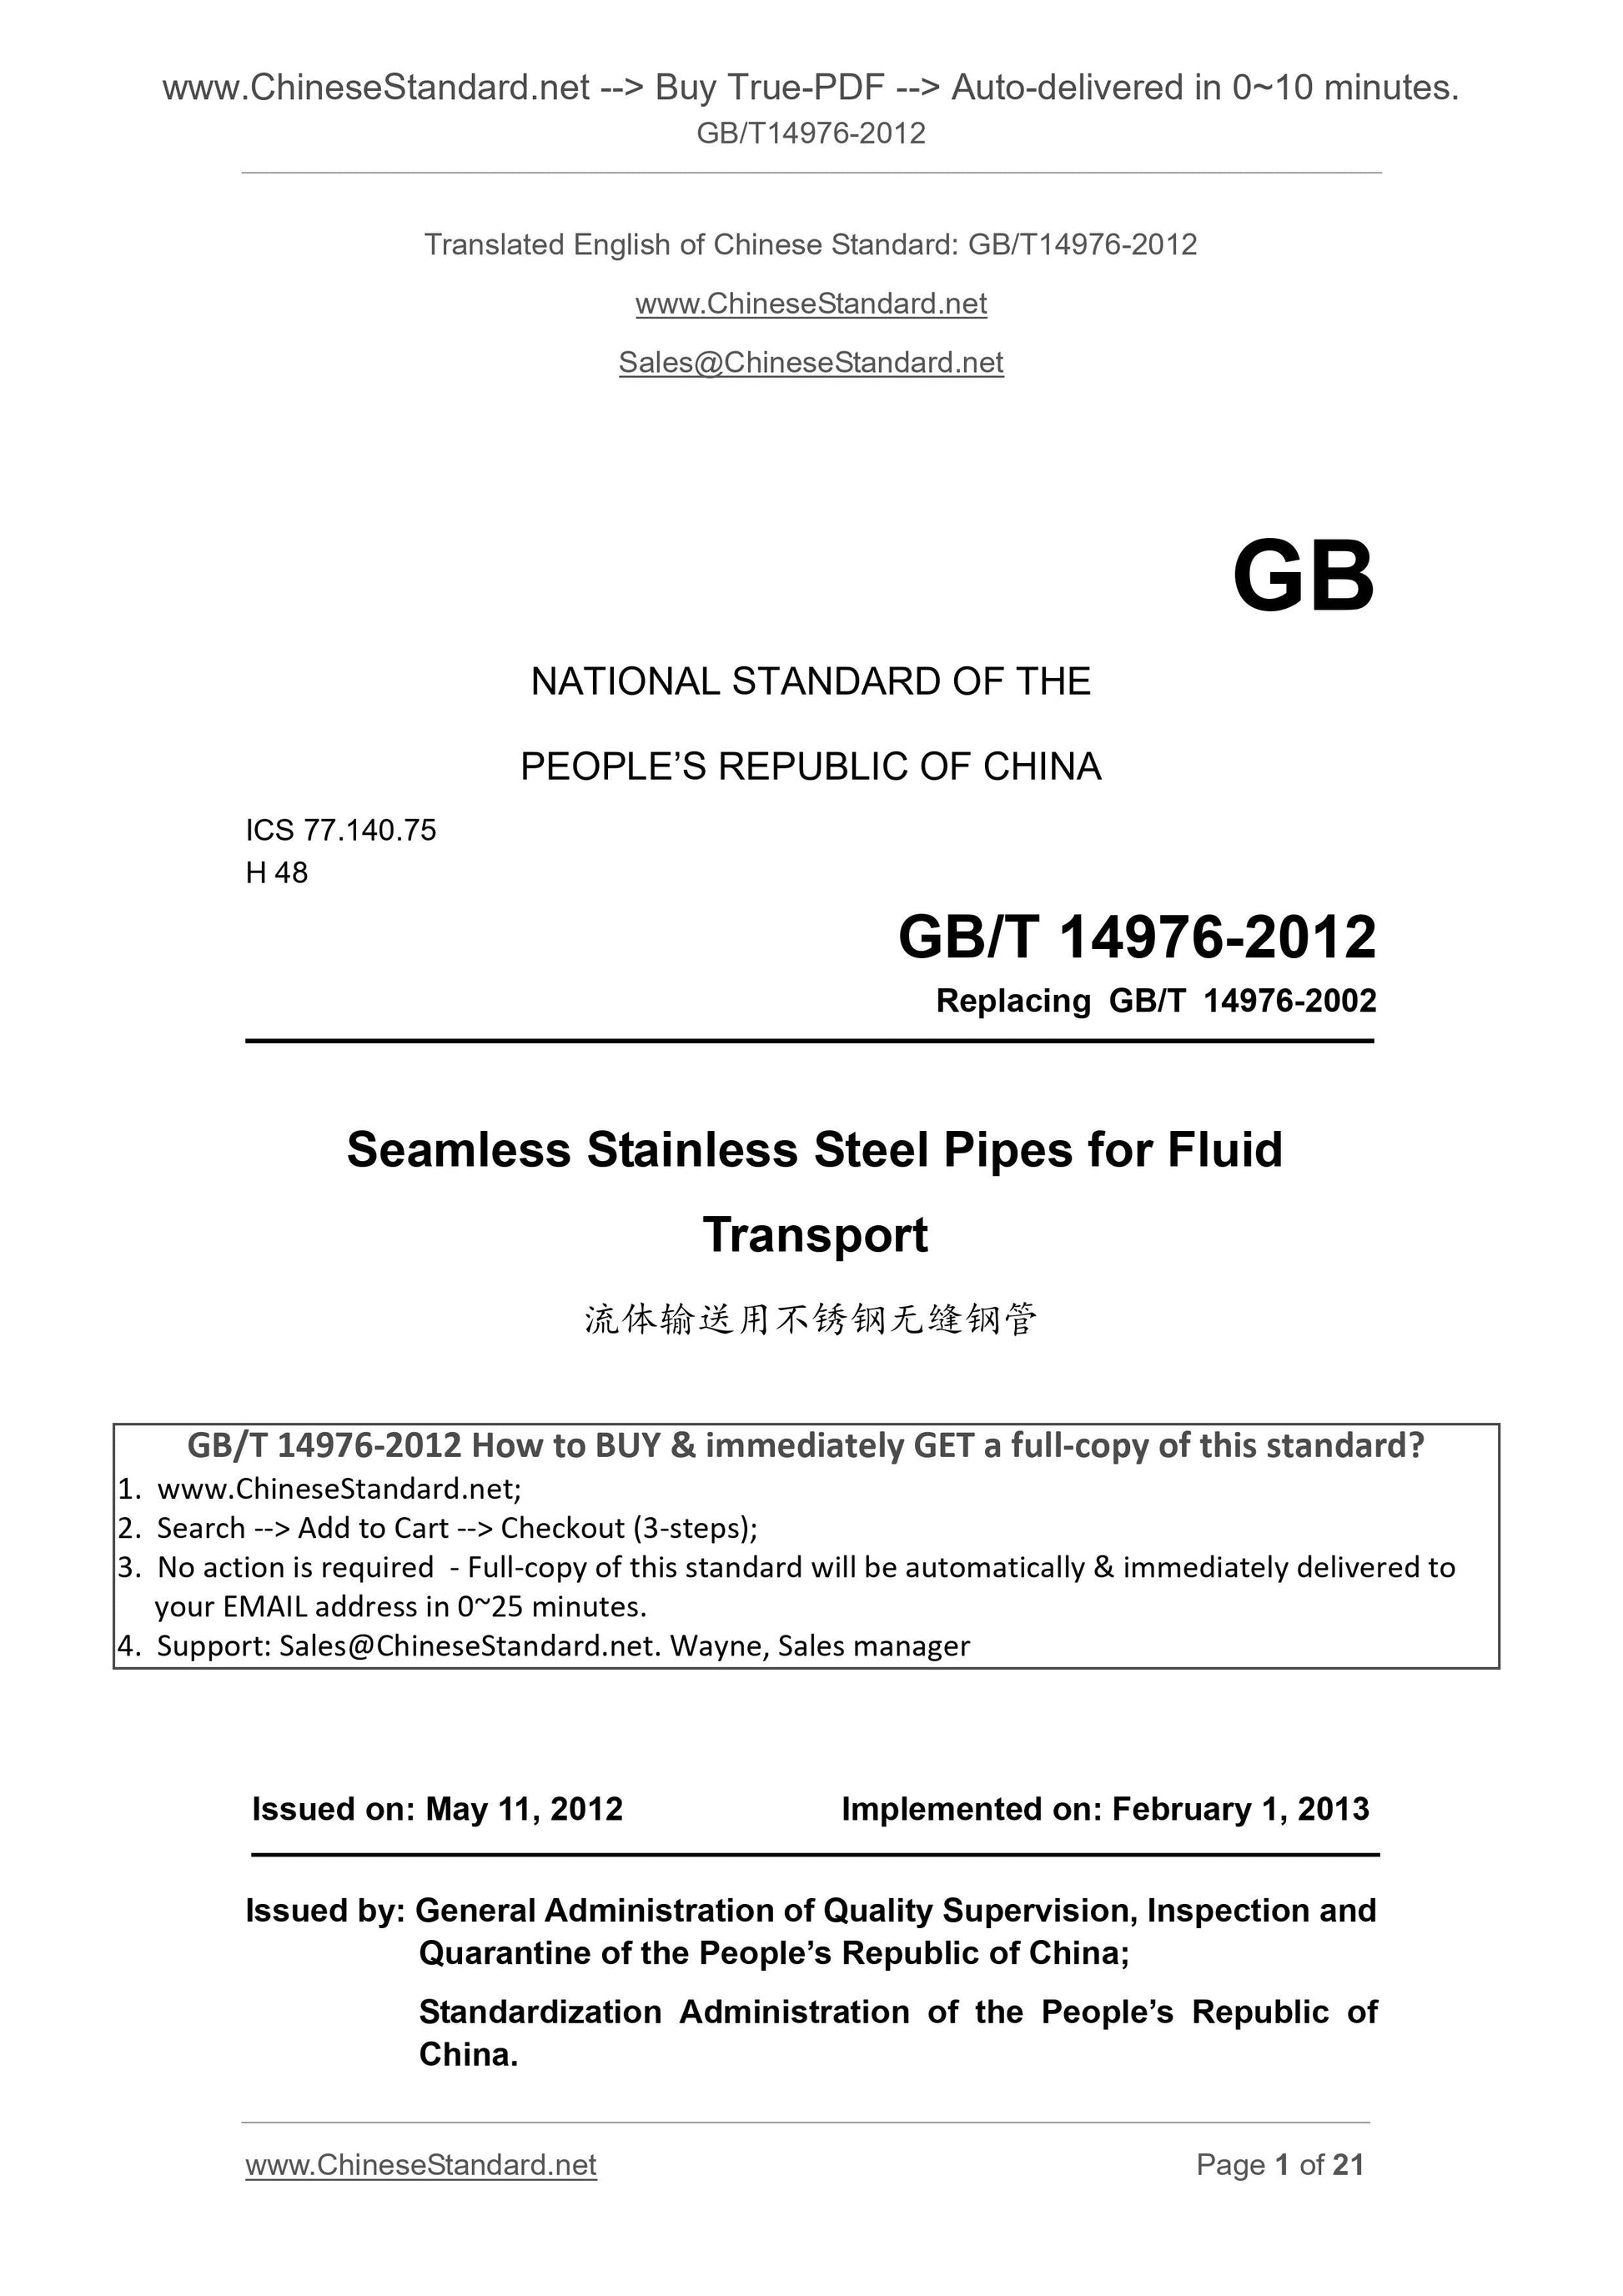 GB/T 14976-2012 Page 1